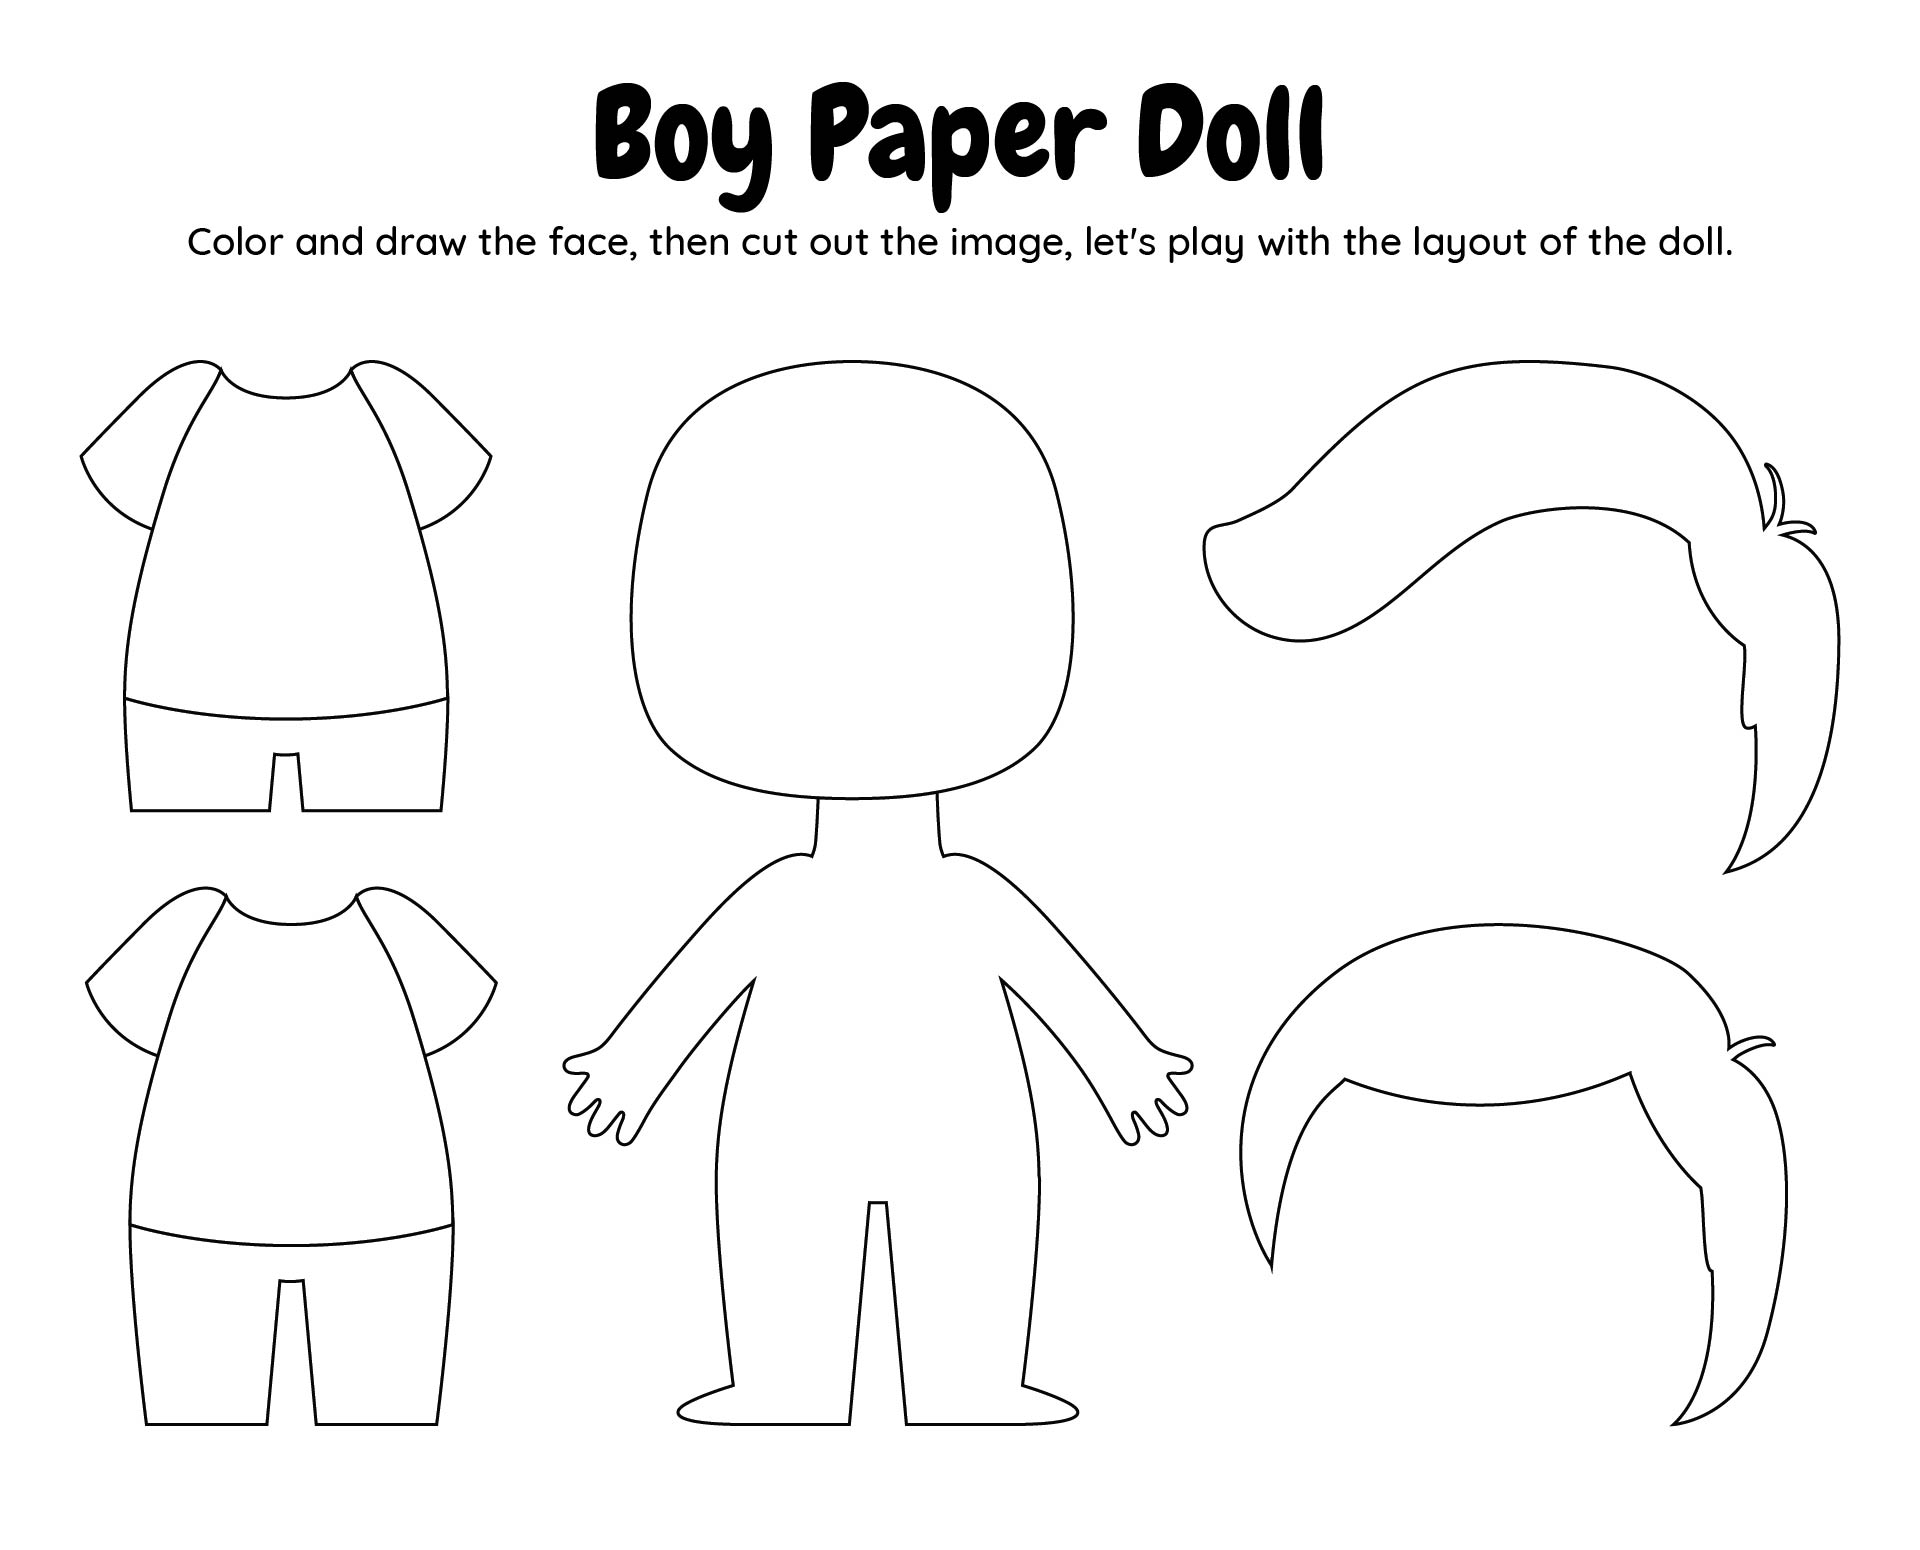 4-best-images-of-printable-boy-paper-doll-template-printable-boy-paper-doll-cutouts-printable